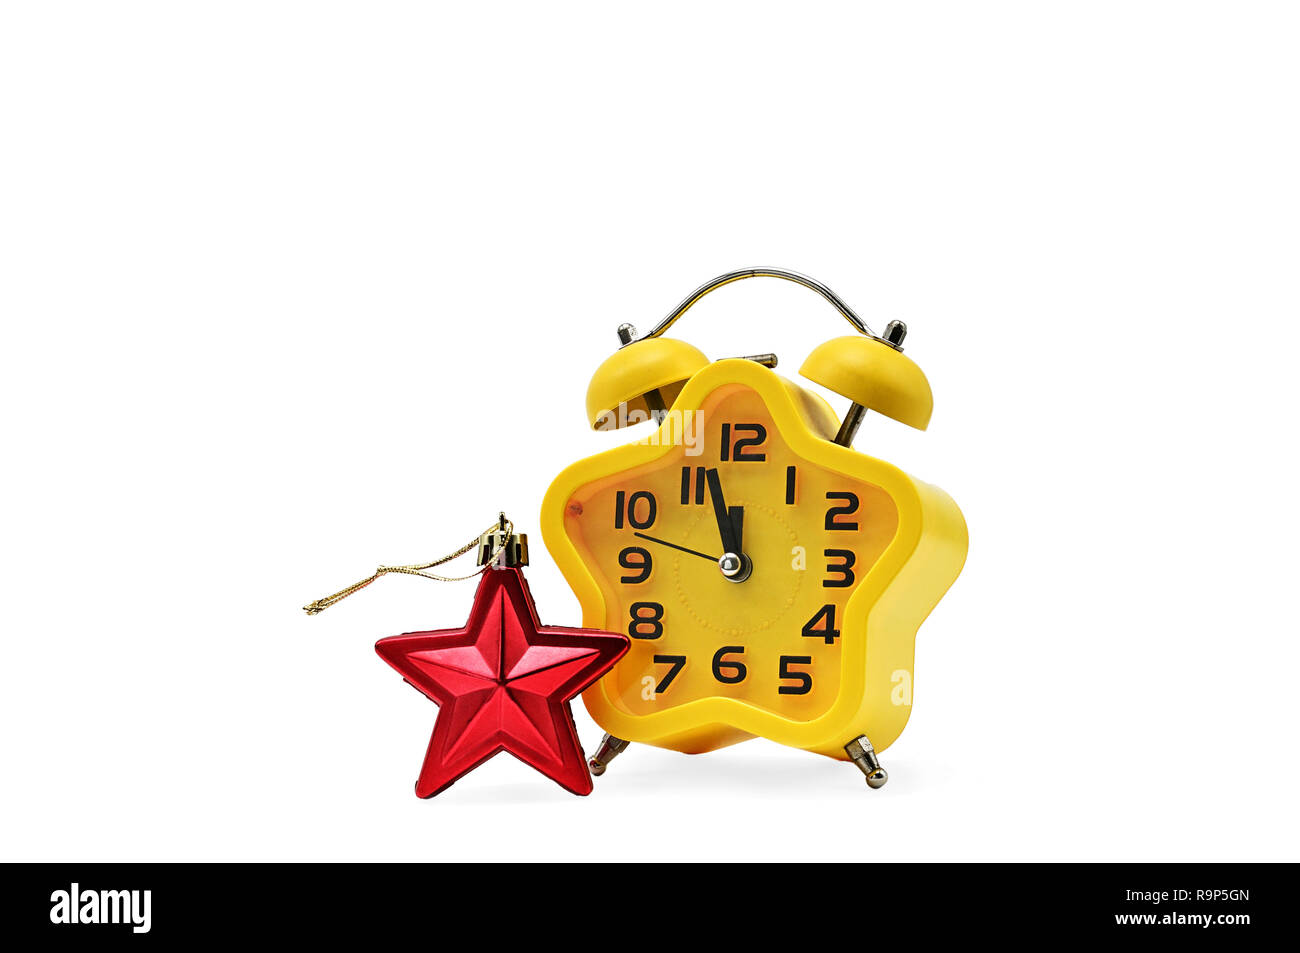 An asterisk Christmas clock shows the remaining time until midnight with a red asterisk,on an isolated white background.Yellow.12,Twelve o'clock Stock Photo